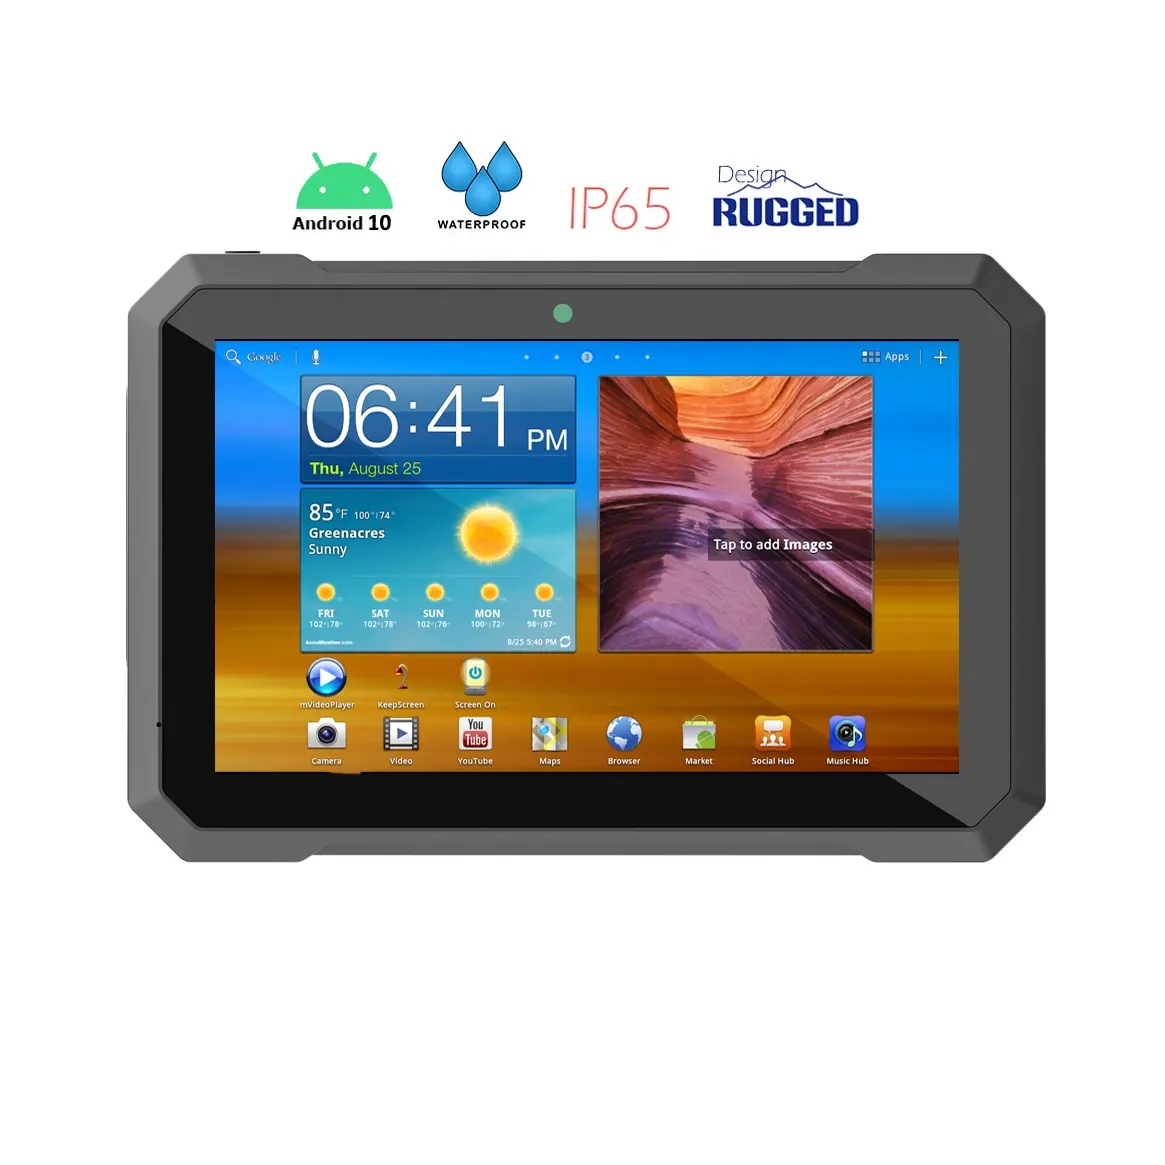 Ruihao Universal Android 10 Os Tablet Octa Core Octa Tablet Rugged Handheld Tablet 7 inch